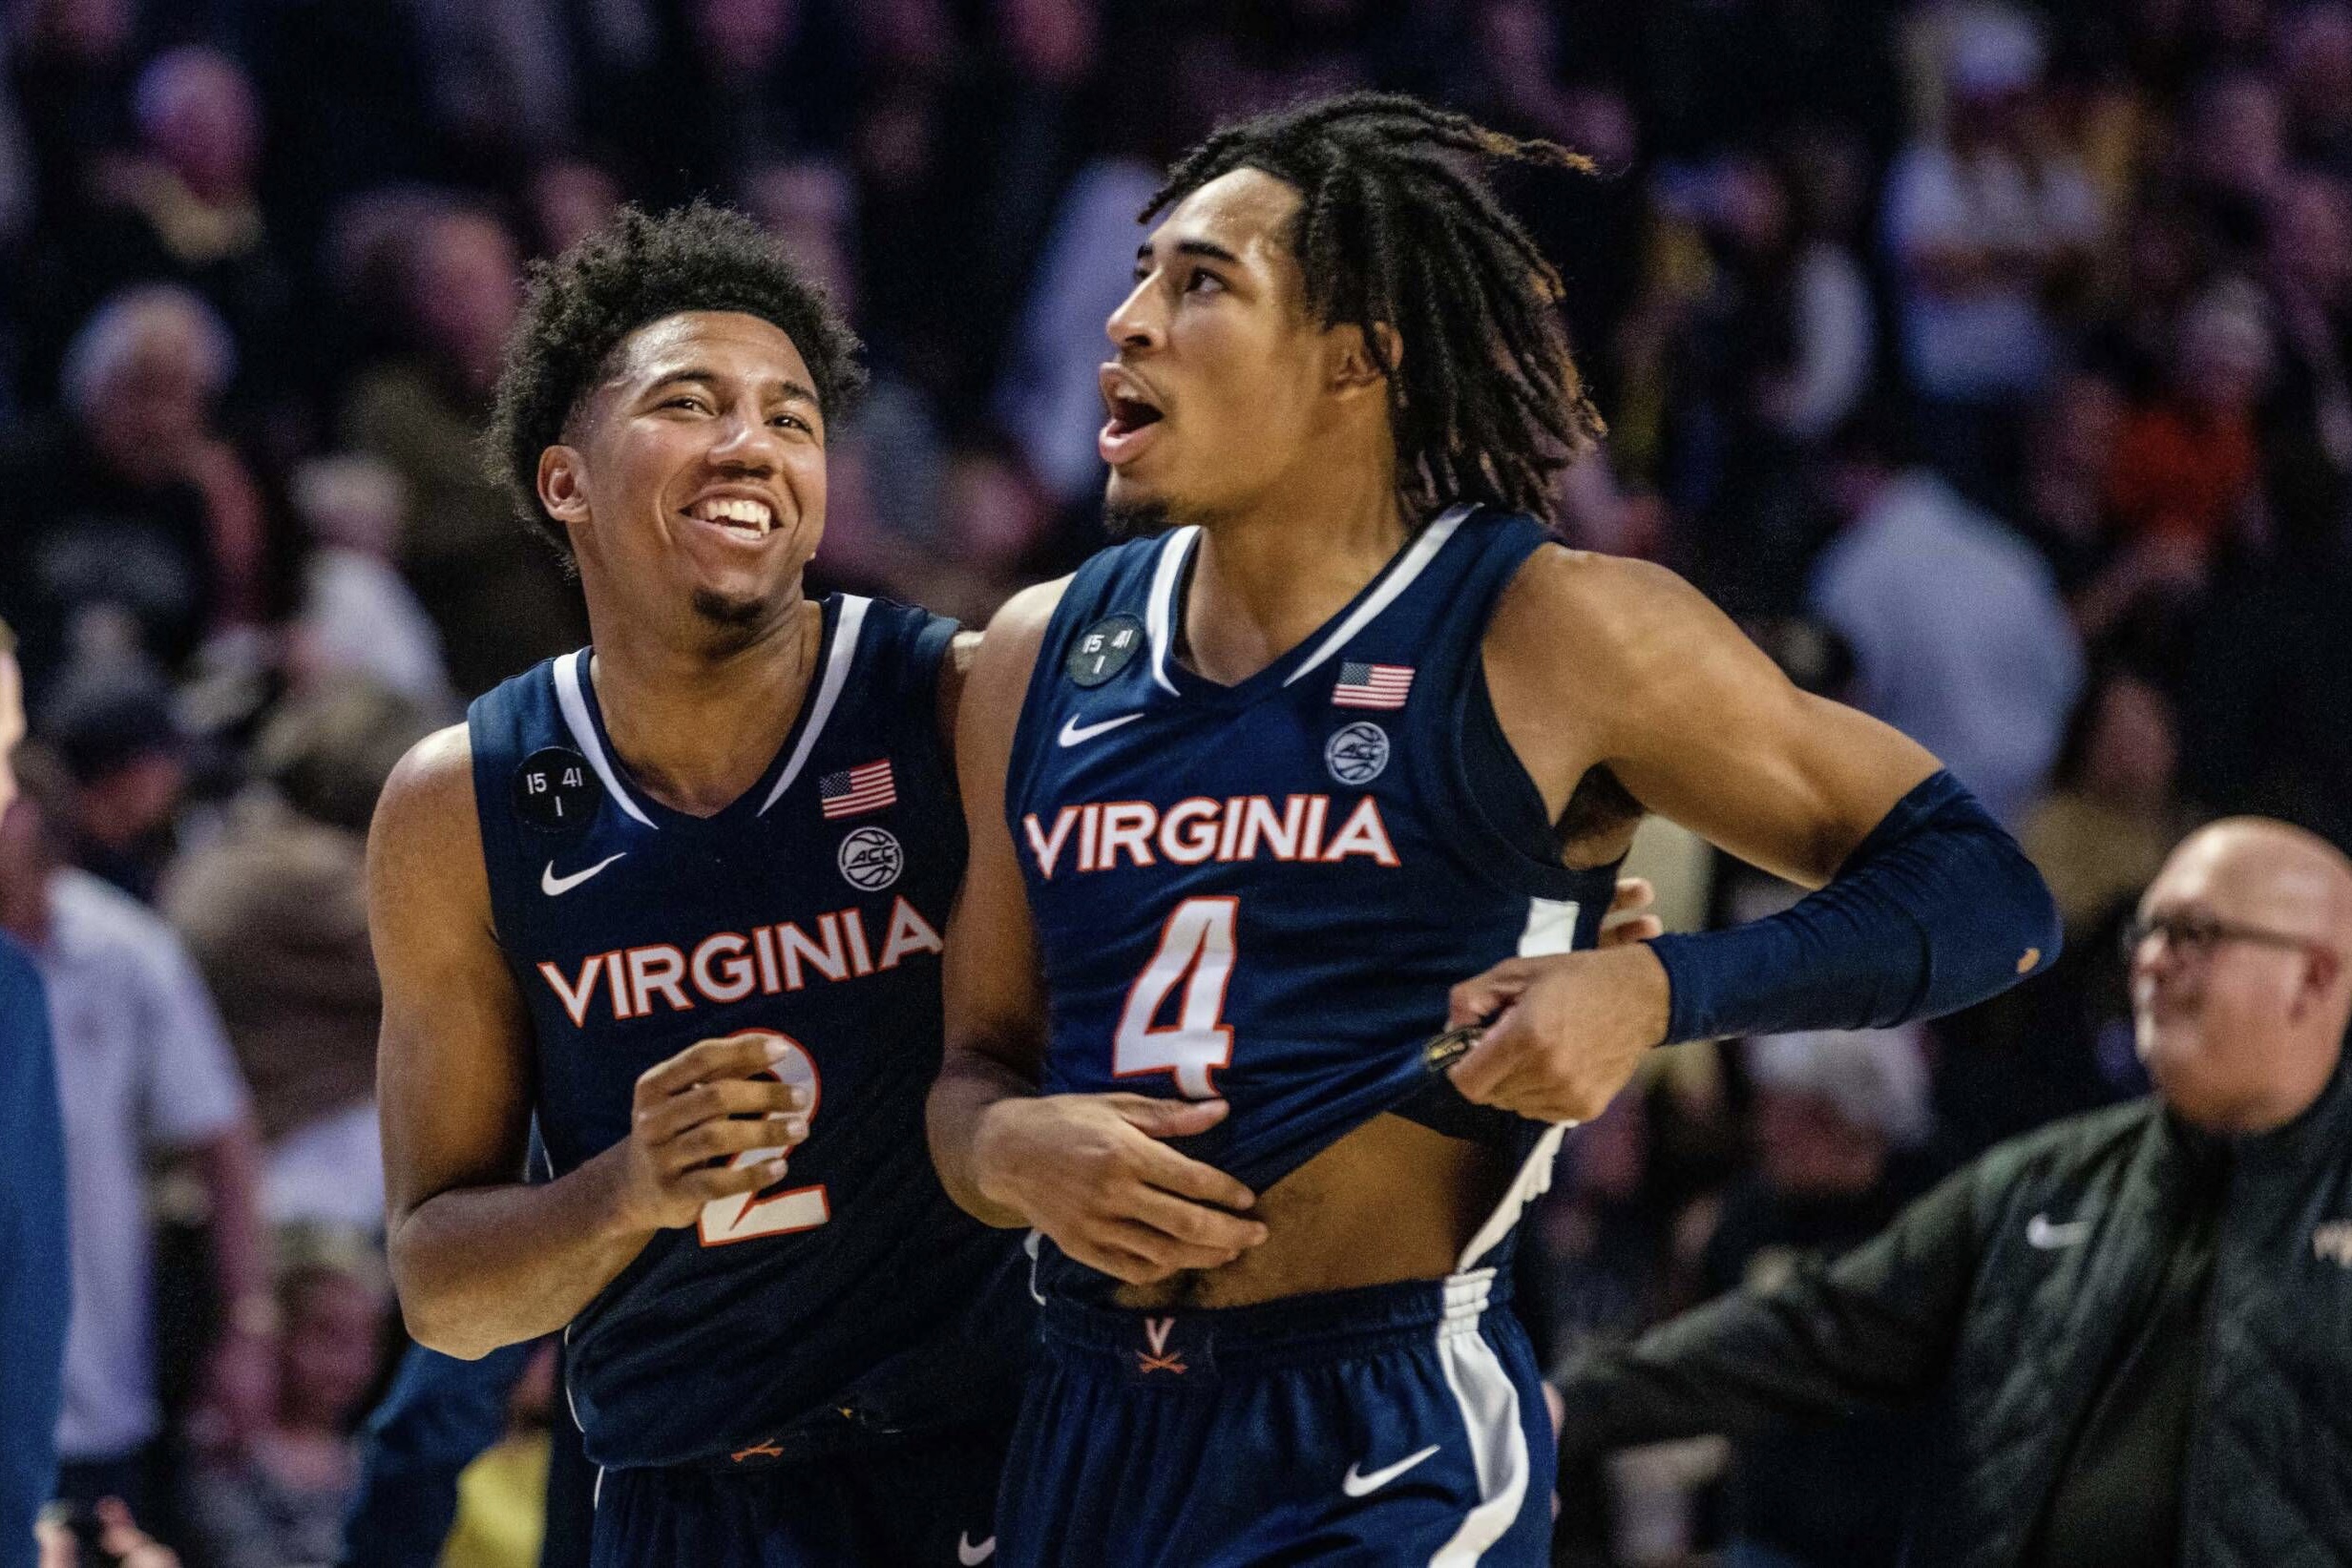 Breaking down the 41 UVA players that earned jersey numbers